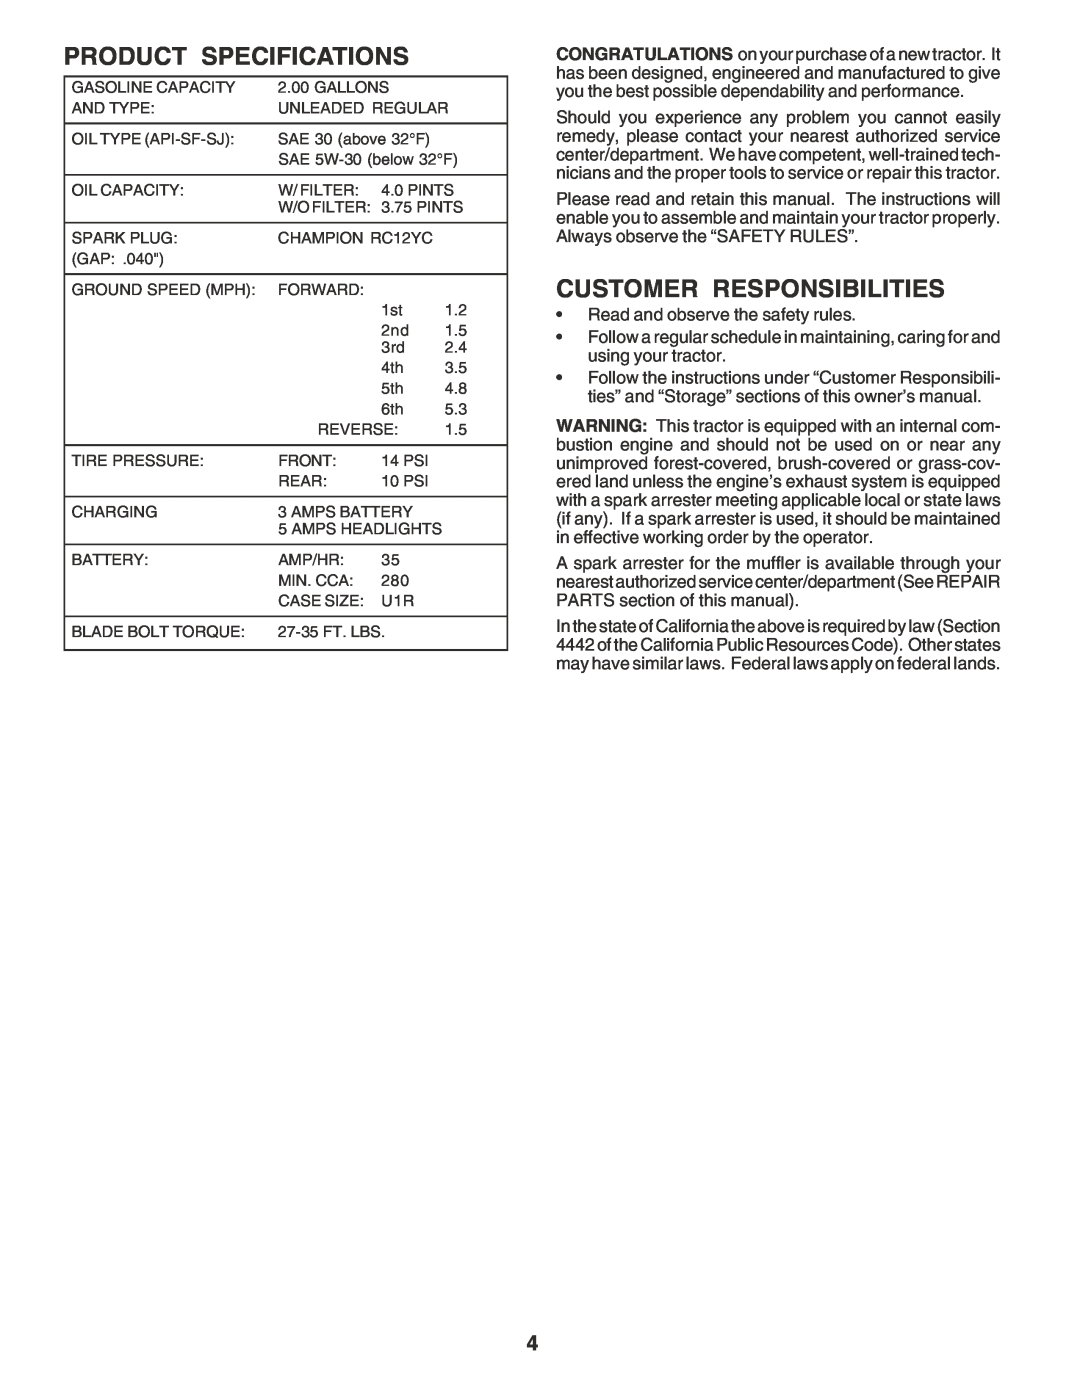 Poulan PR17542STA owner manual Product Specifications, Customer Responsibilities 